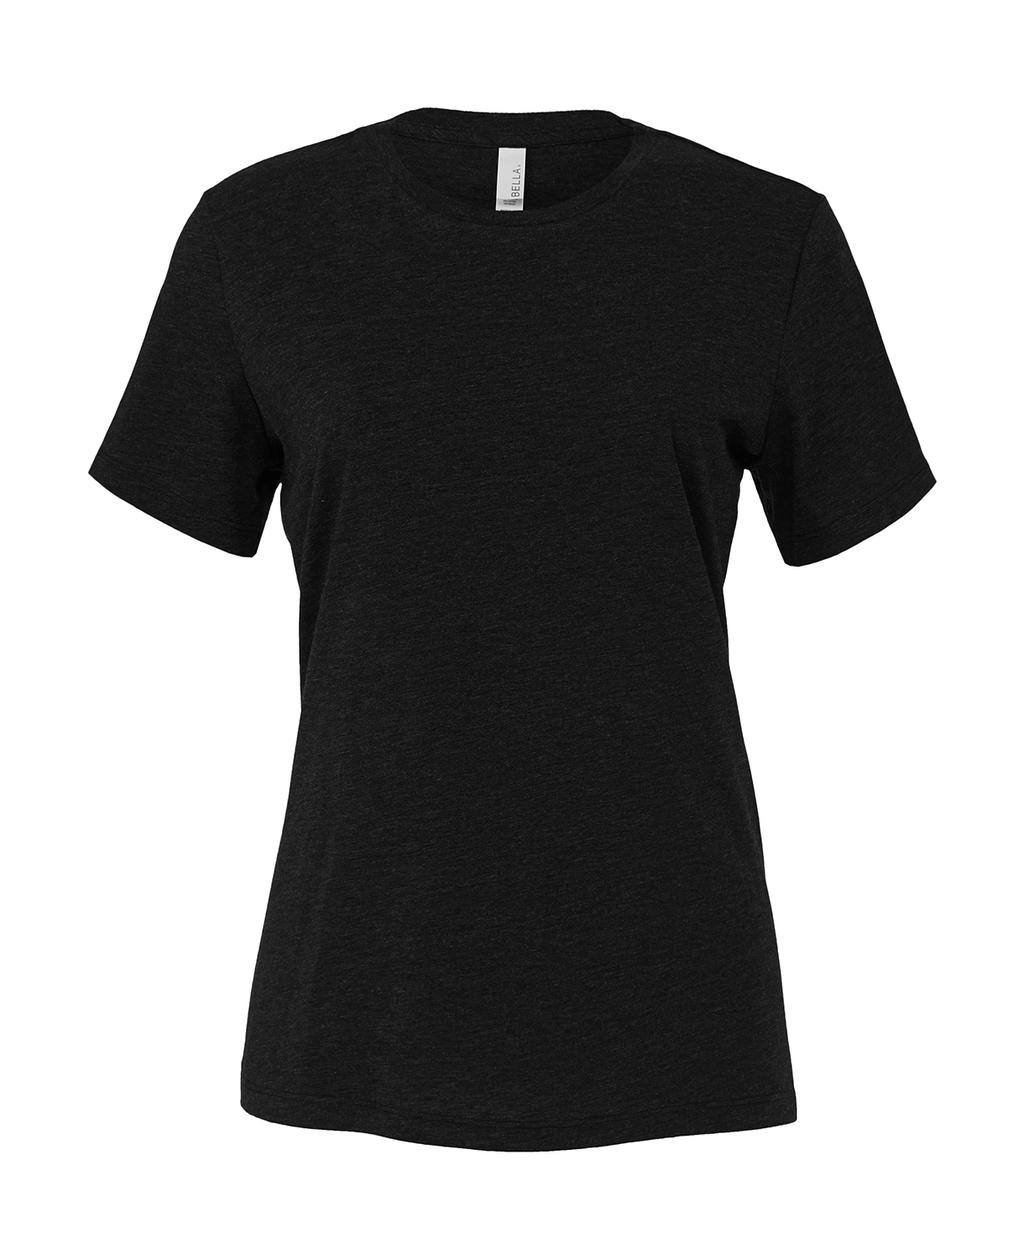  Womens Relaxed Jersey Short Sleeve Tee in Farbe Black Heather